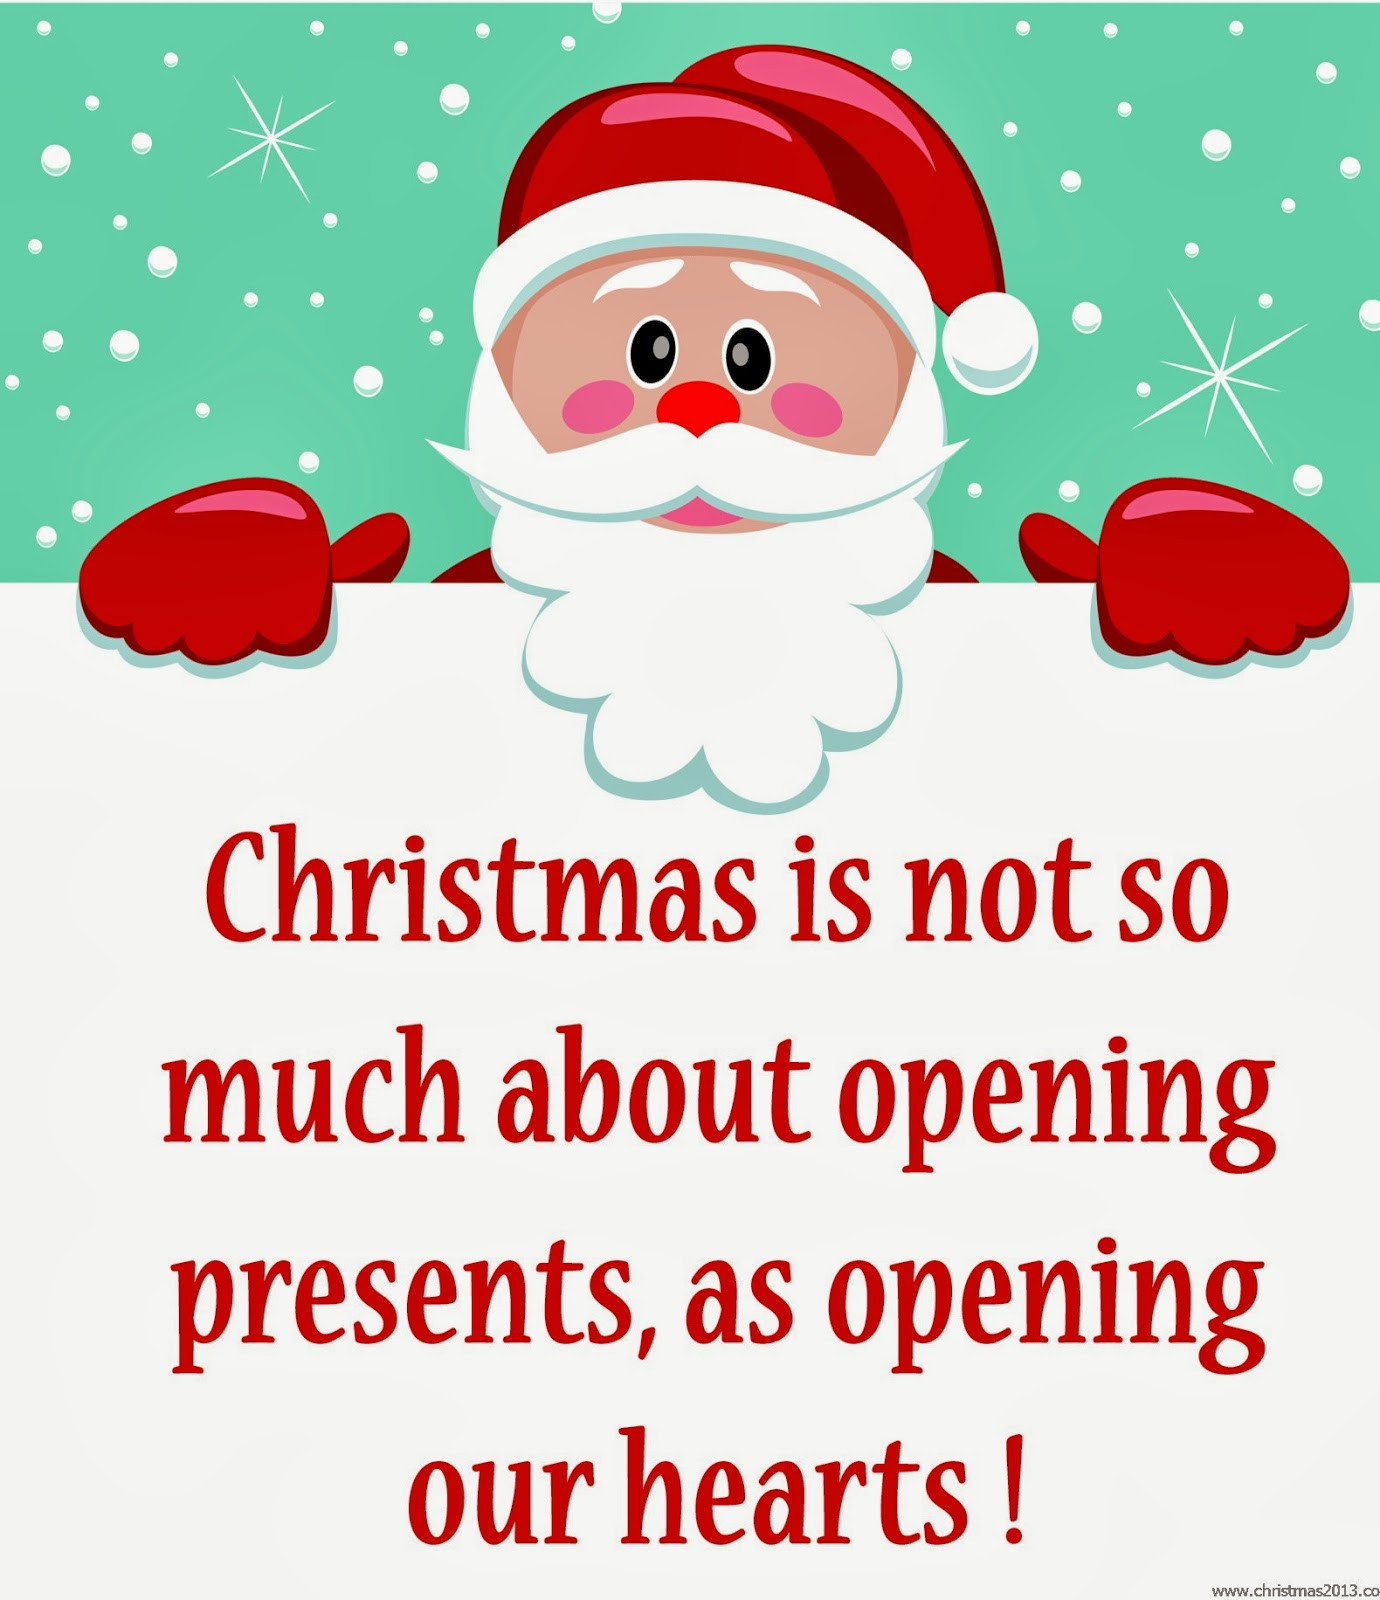 Merry Christmas Quotes And Images
 25 Best Christmas Quotes And Wishes Quotes Hunter